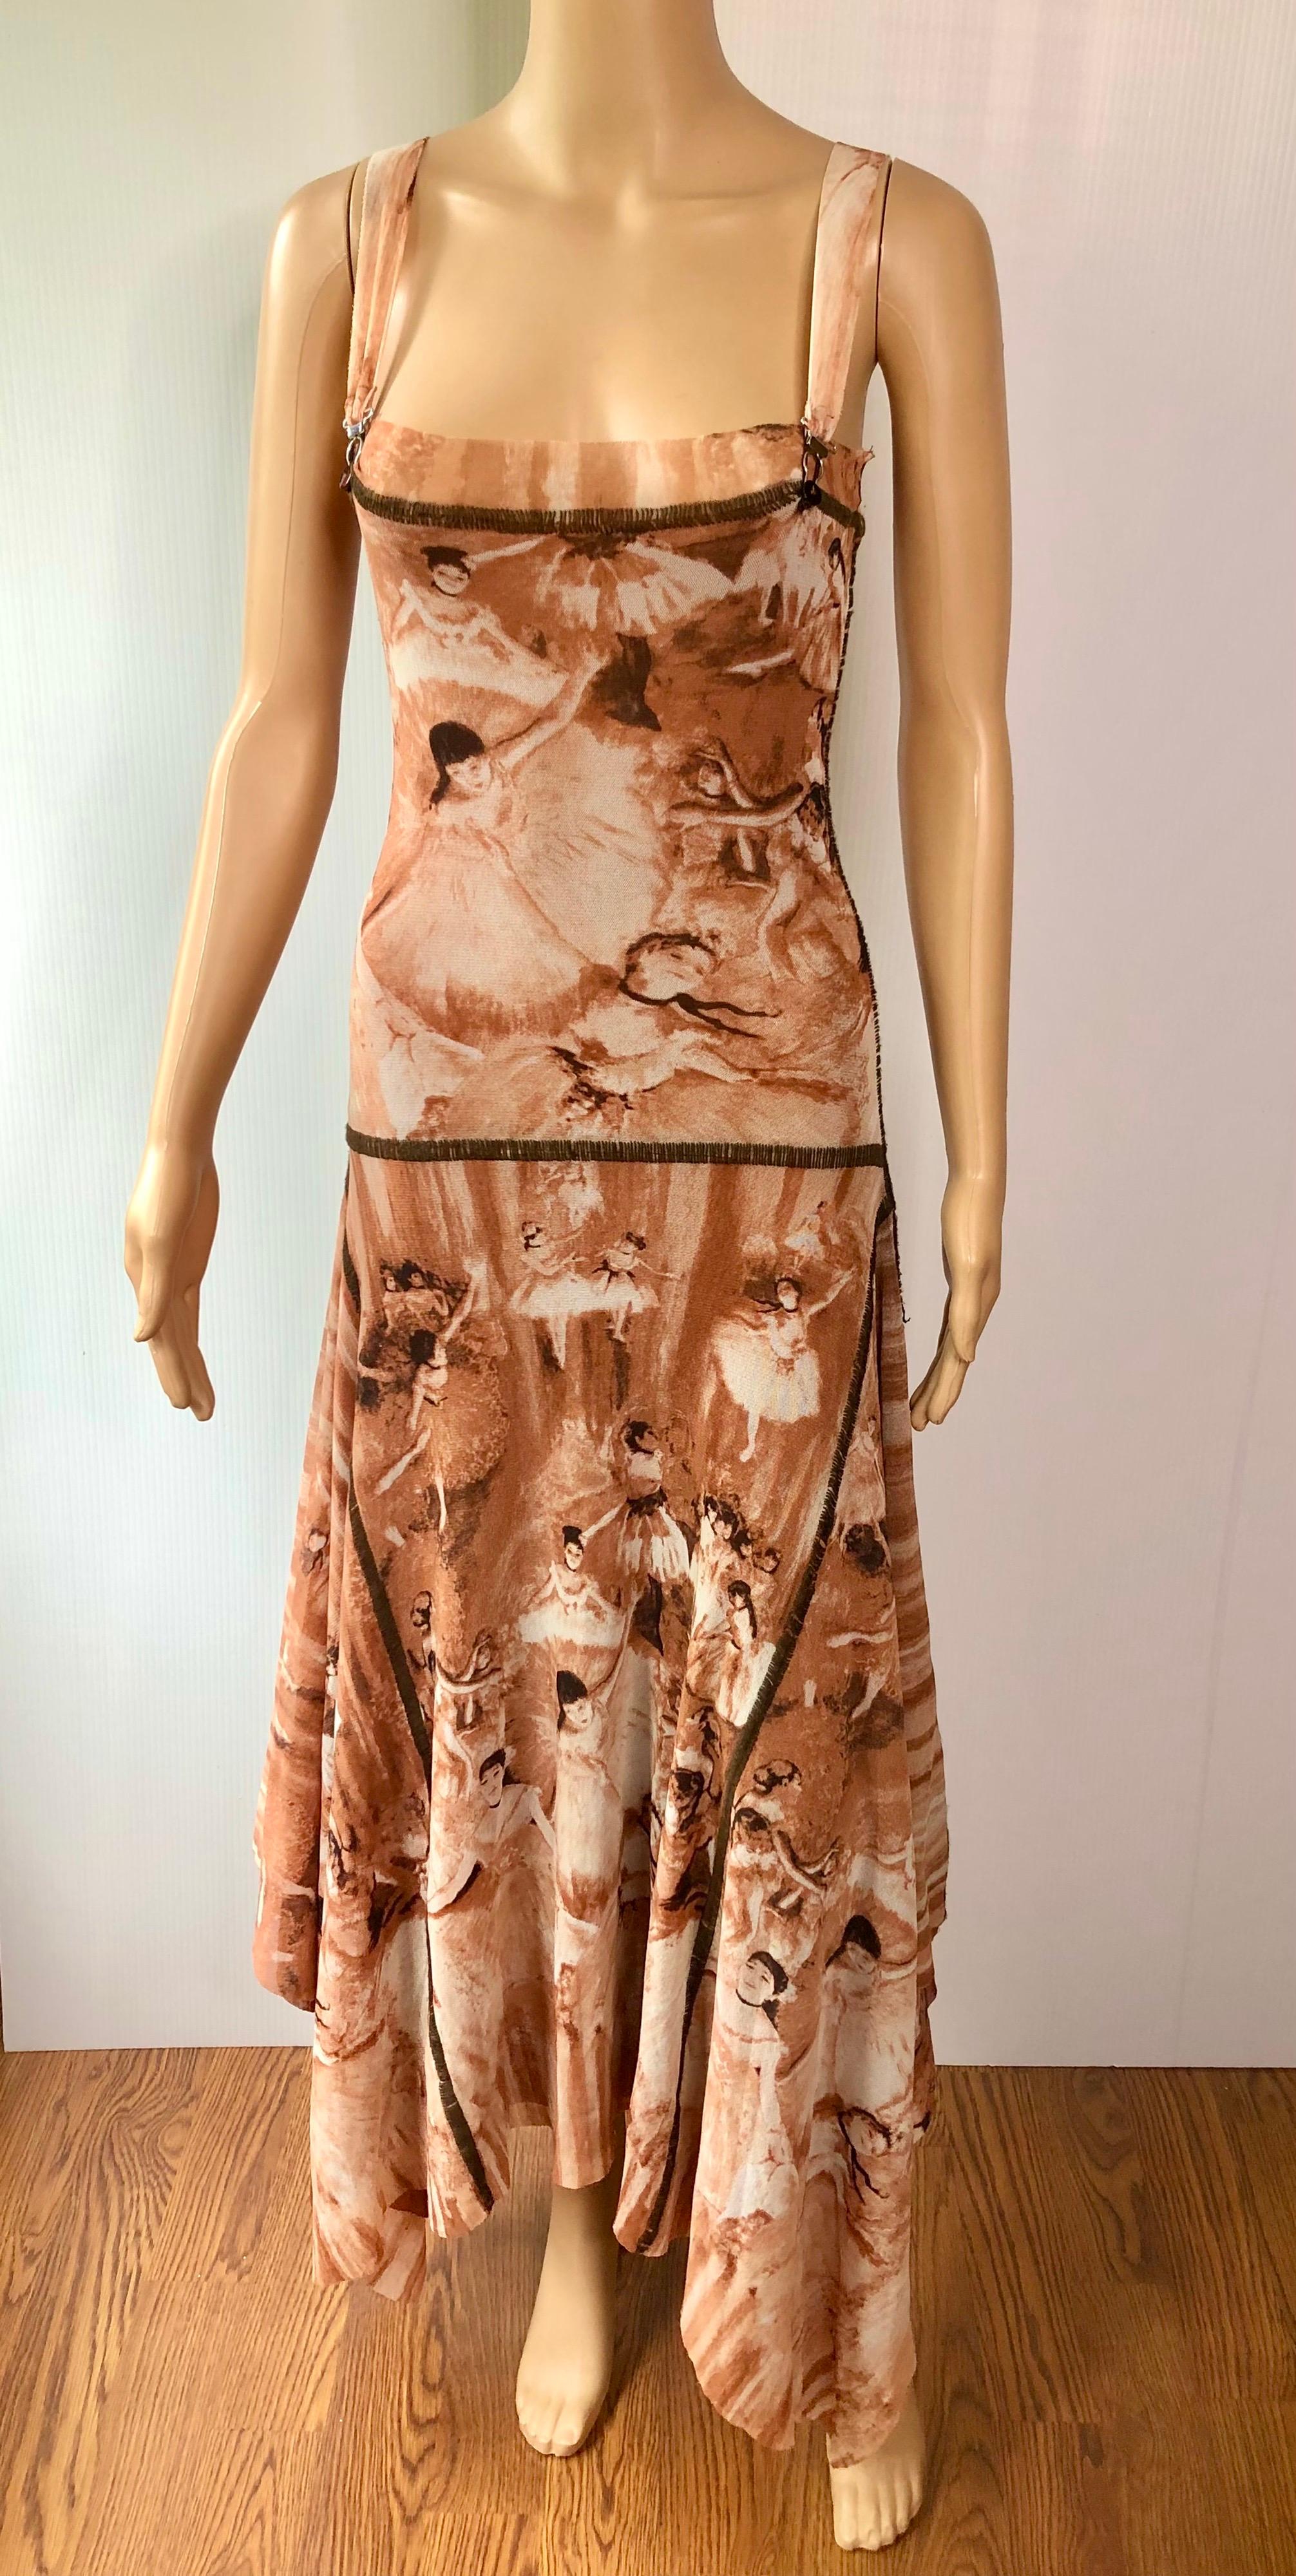 Jean Paul Gaultier S/S 2004 Vintage Edgar Degas Ballerina Print Mesh Maxi Dress Size L

Jean Paul Gaultier mesh maxi dress featuring Edgar Degas ballet print and suspender straps with silver metal clips.